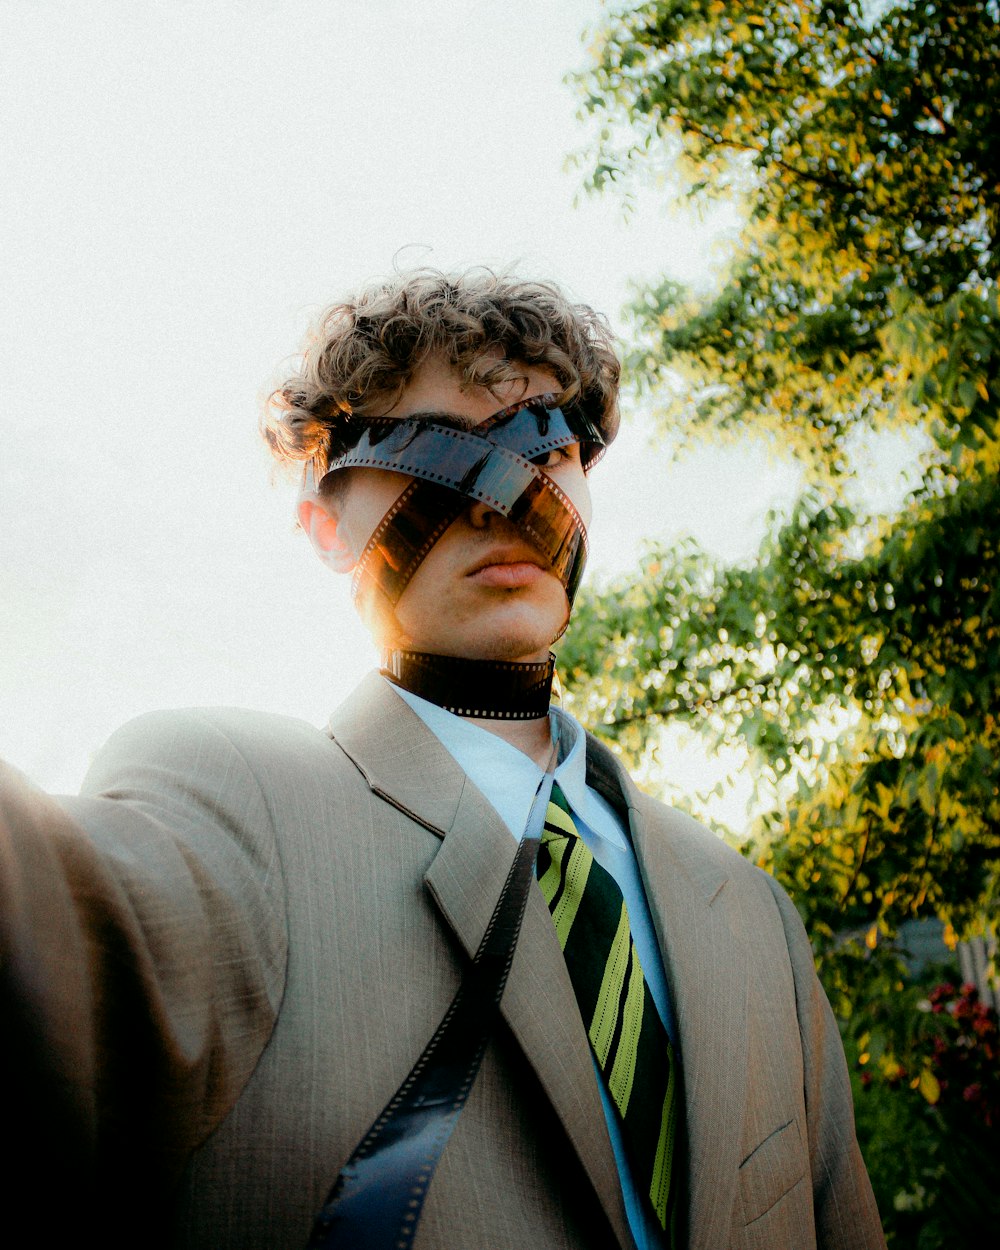 a man in a suit and tie with a blindfold on his face